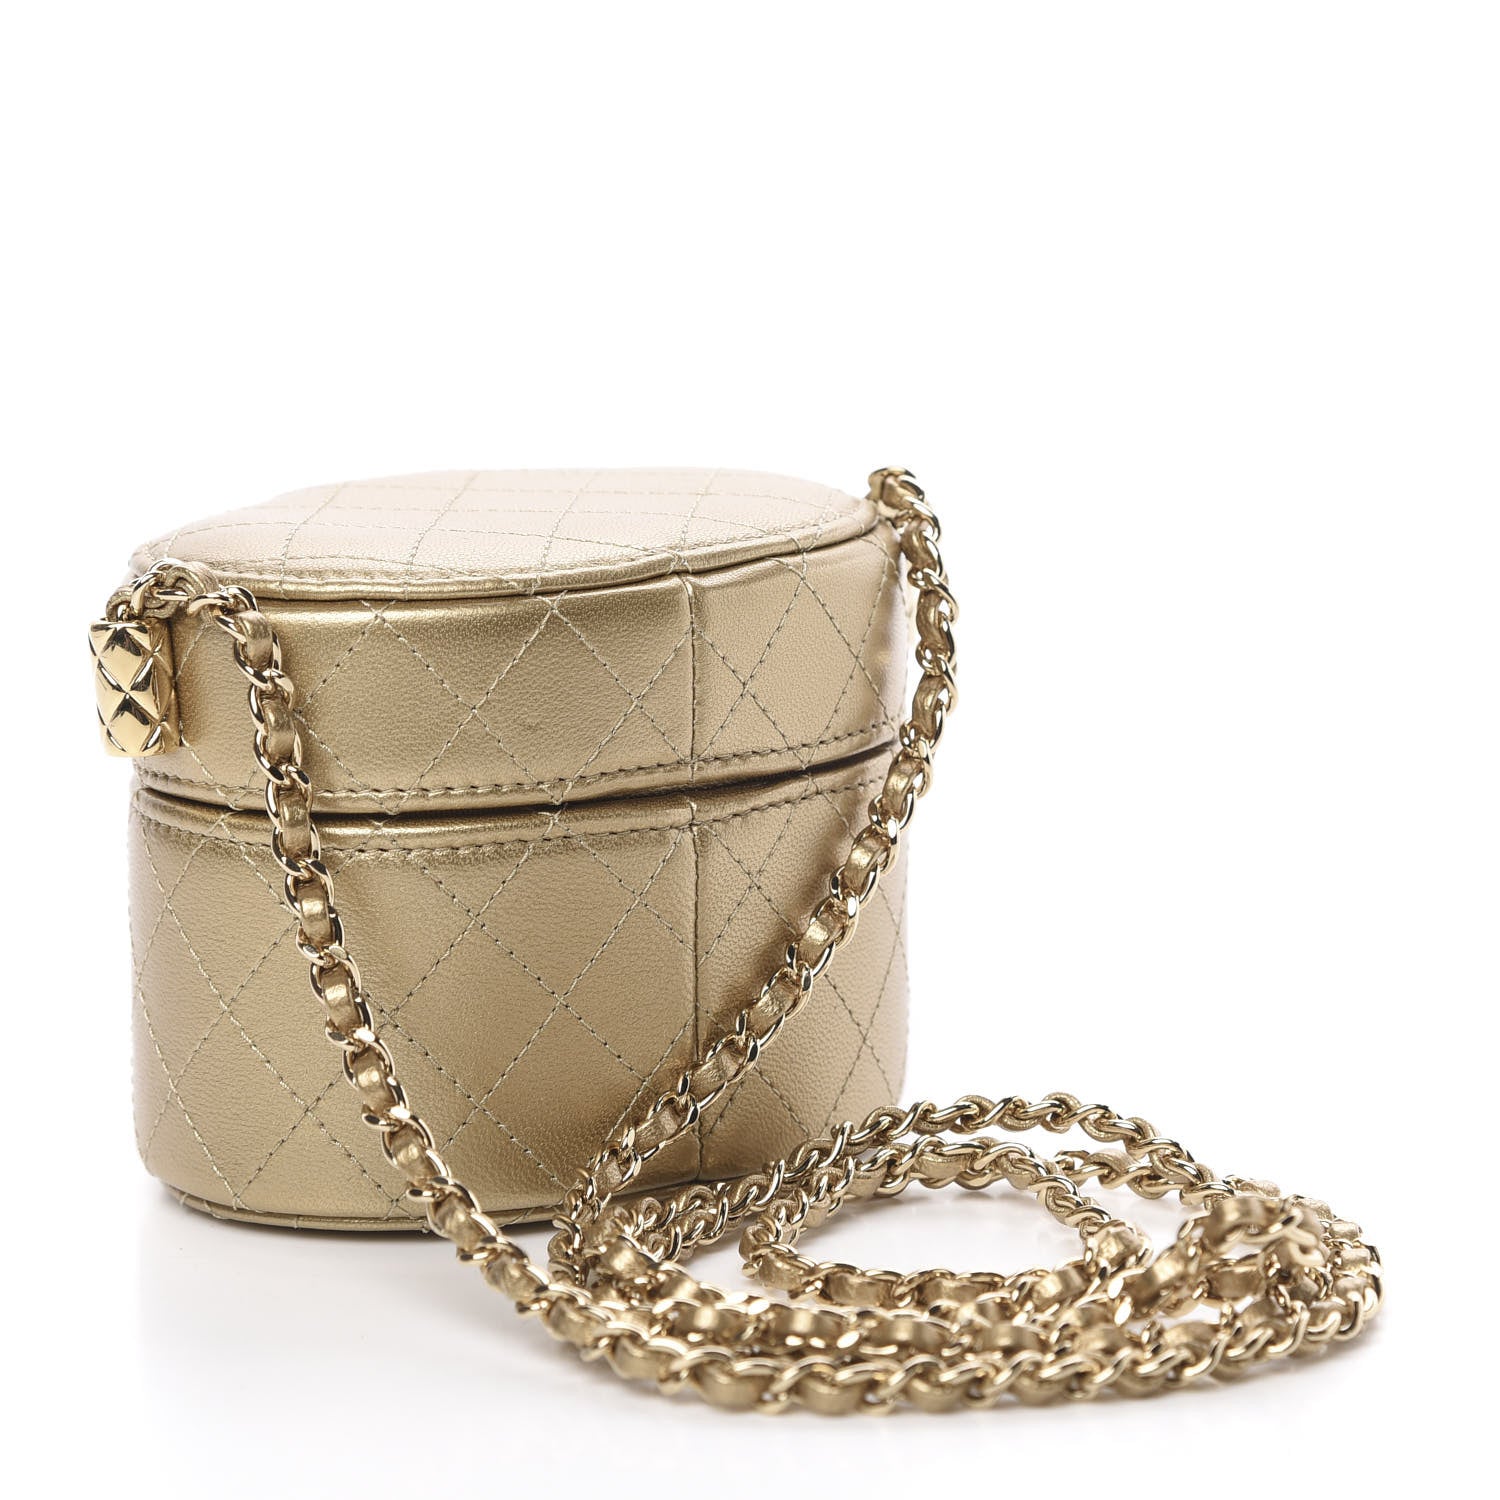 Chanel Micro Mini Gold Quilted Lambskin Leather Jewelry Box Crossbody Bag